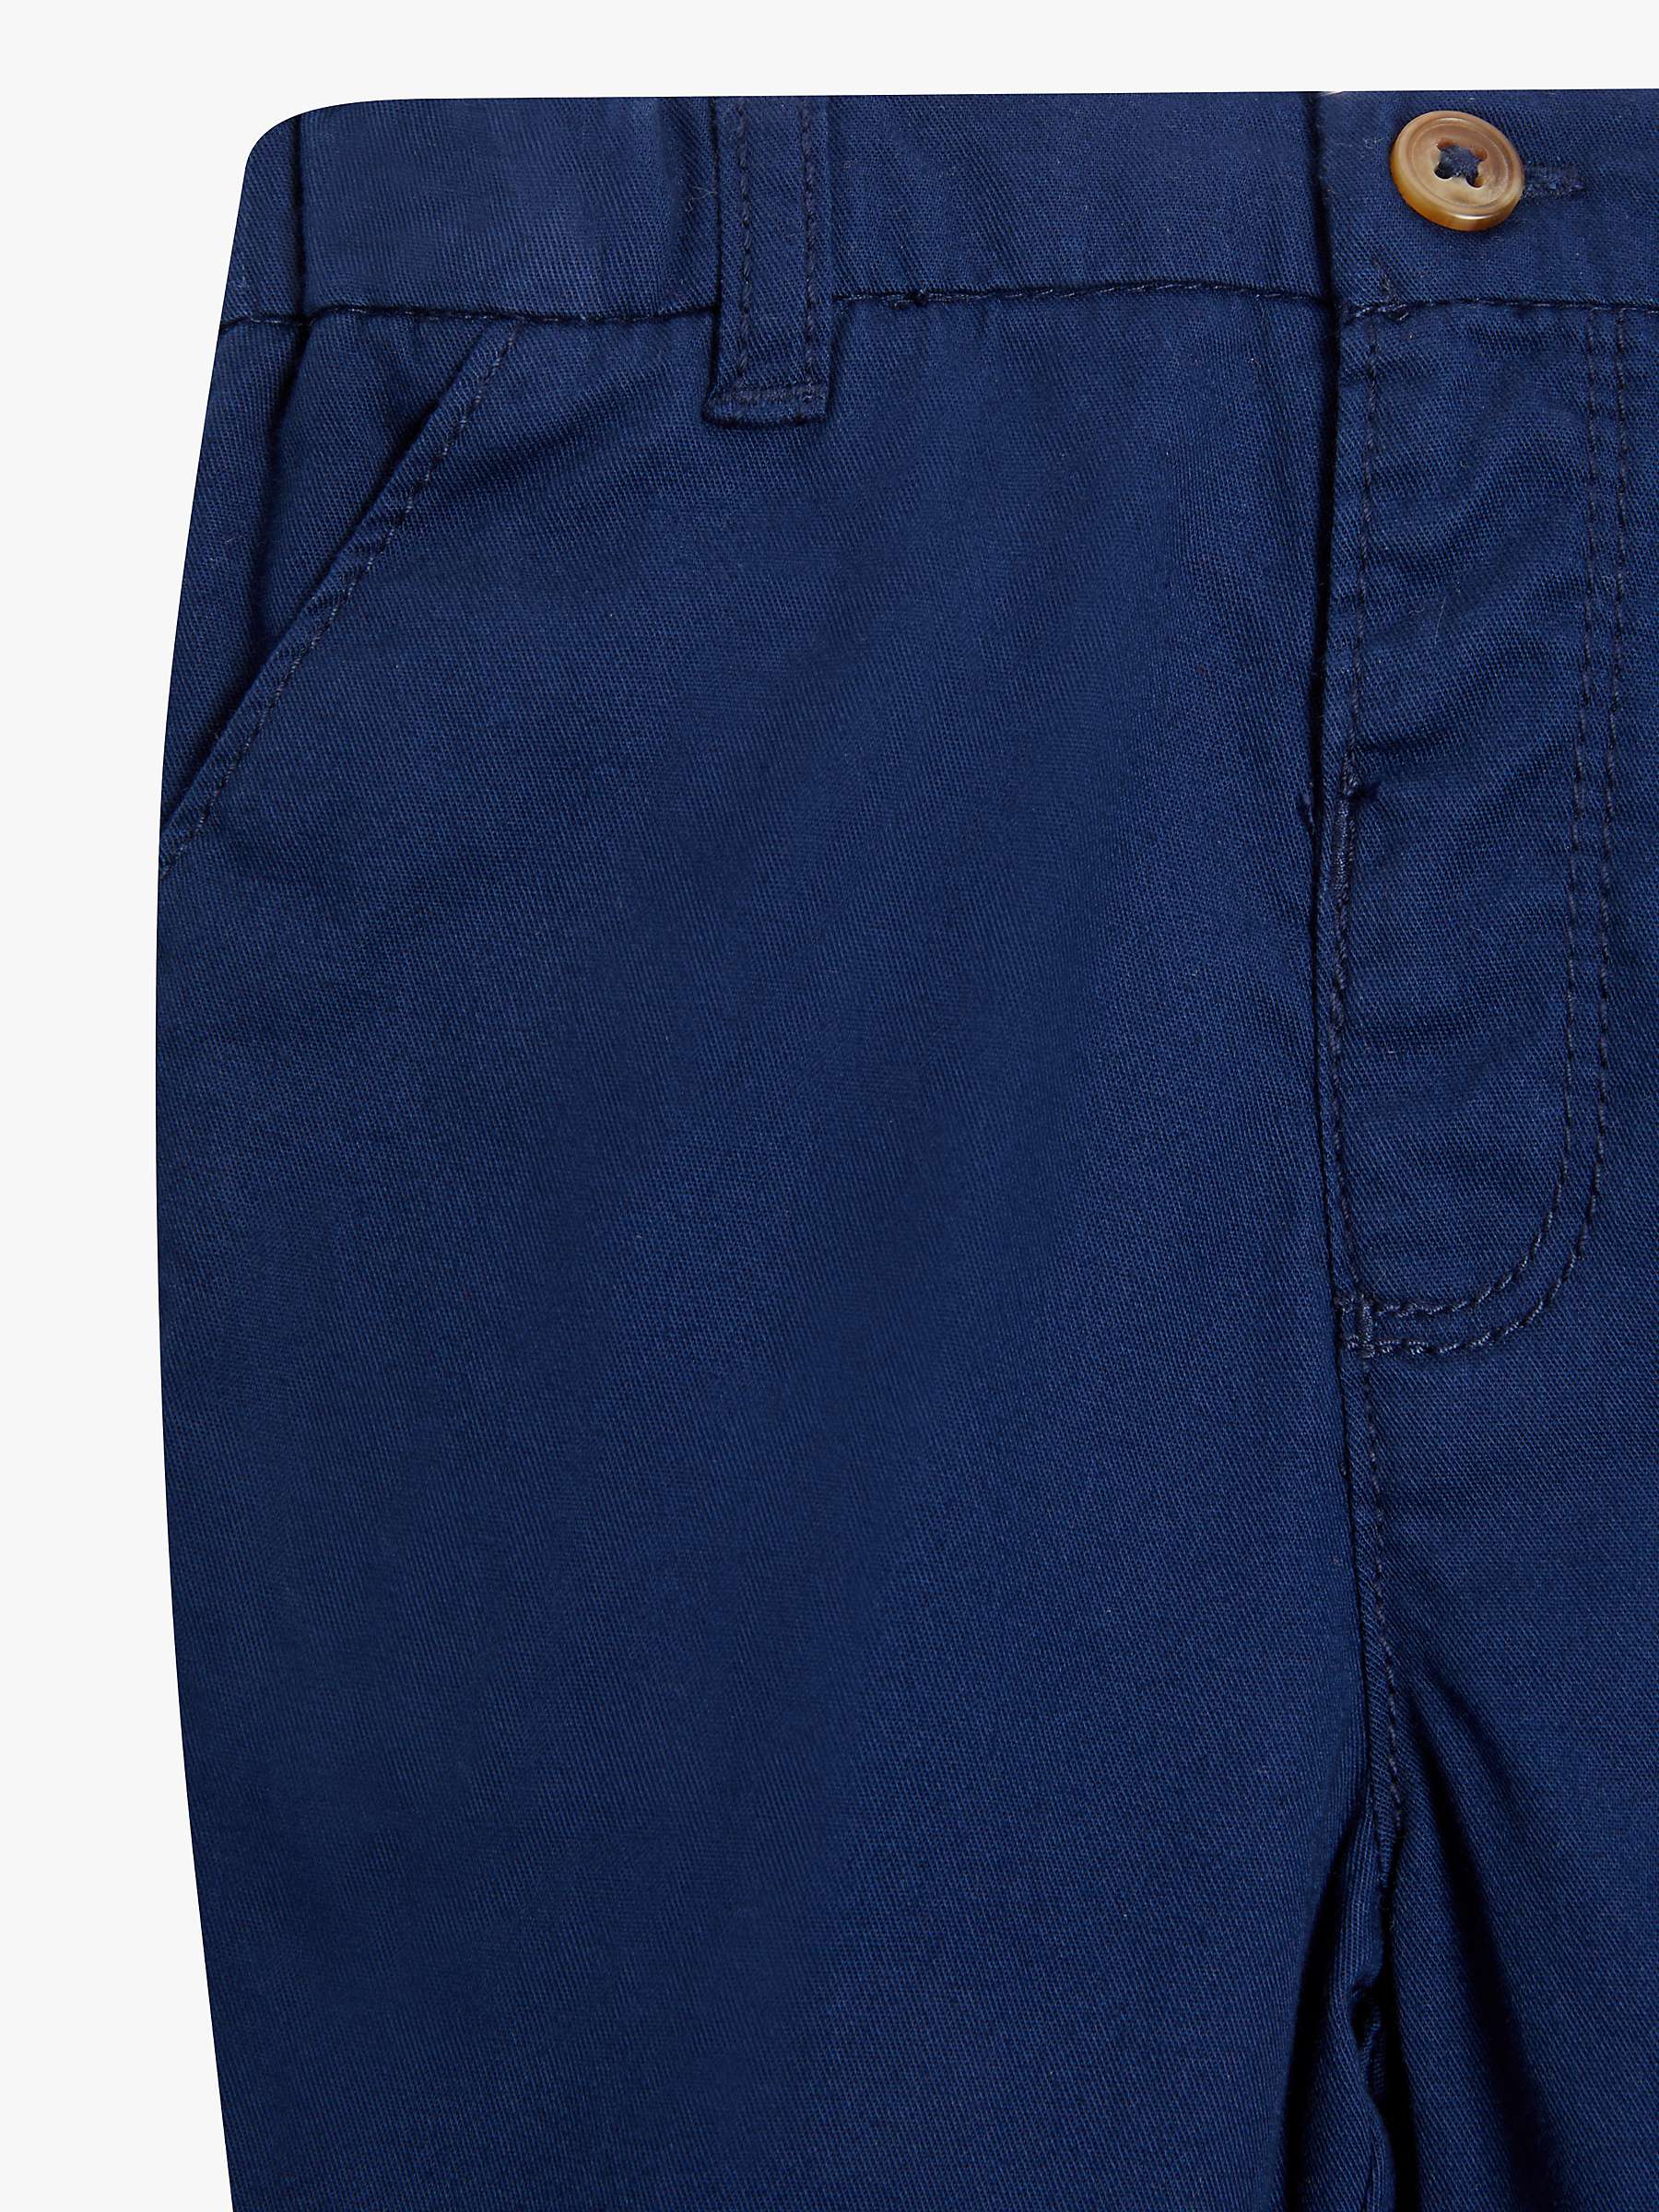 Buy John Lewis Heirloom Collection Baby Chino Trousers, Blue Online at johnlewis.com